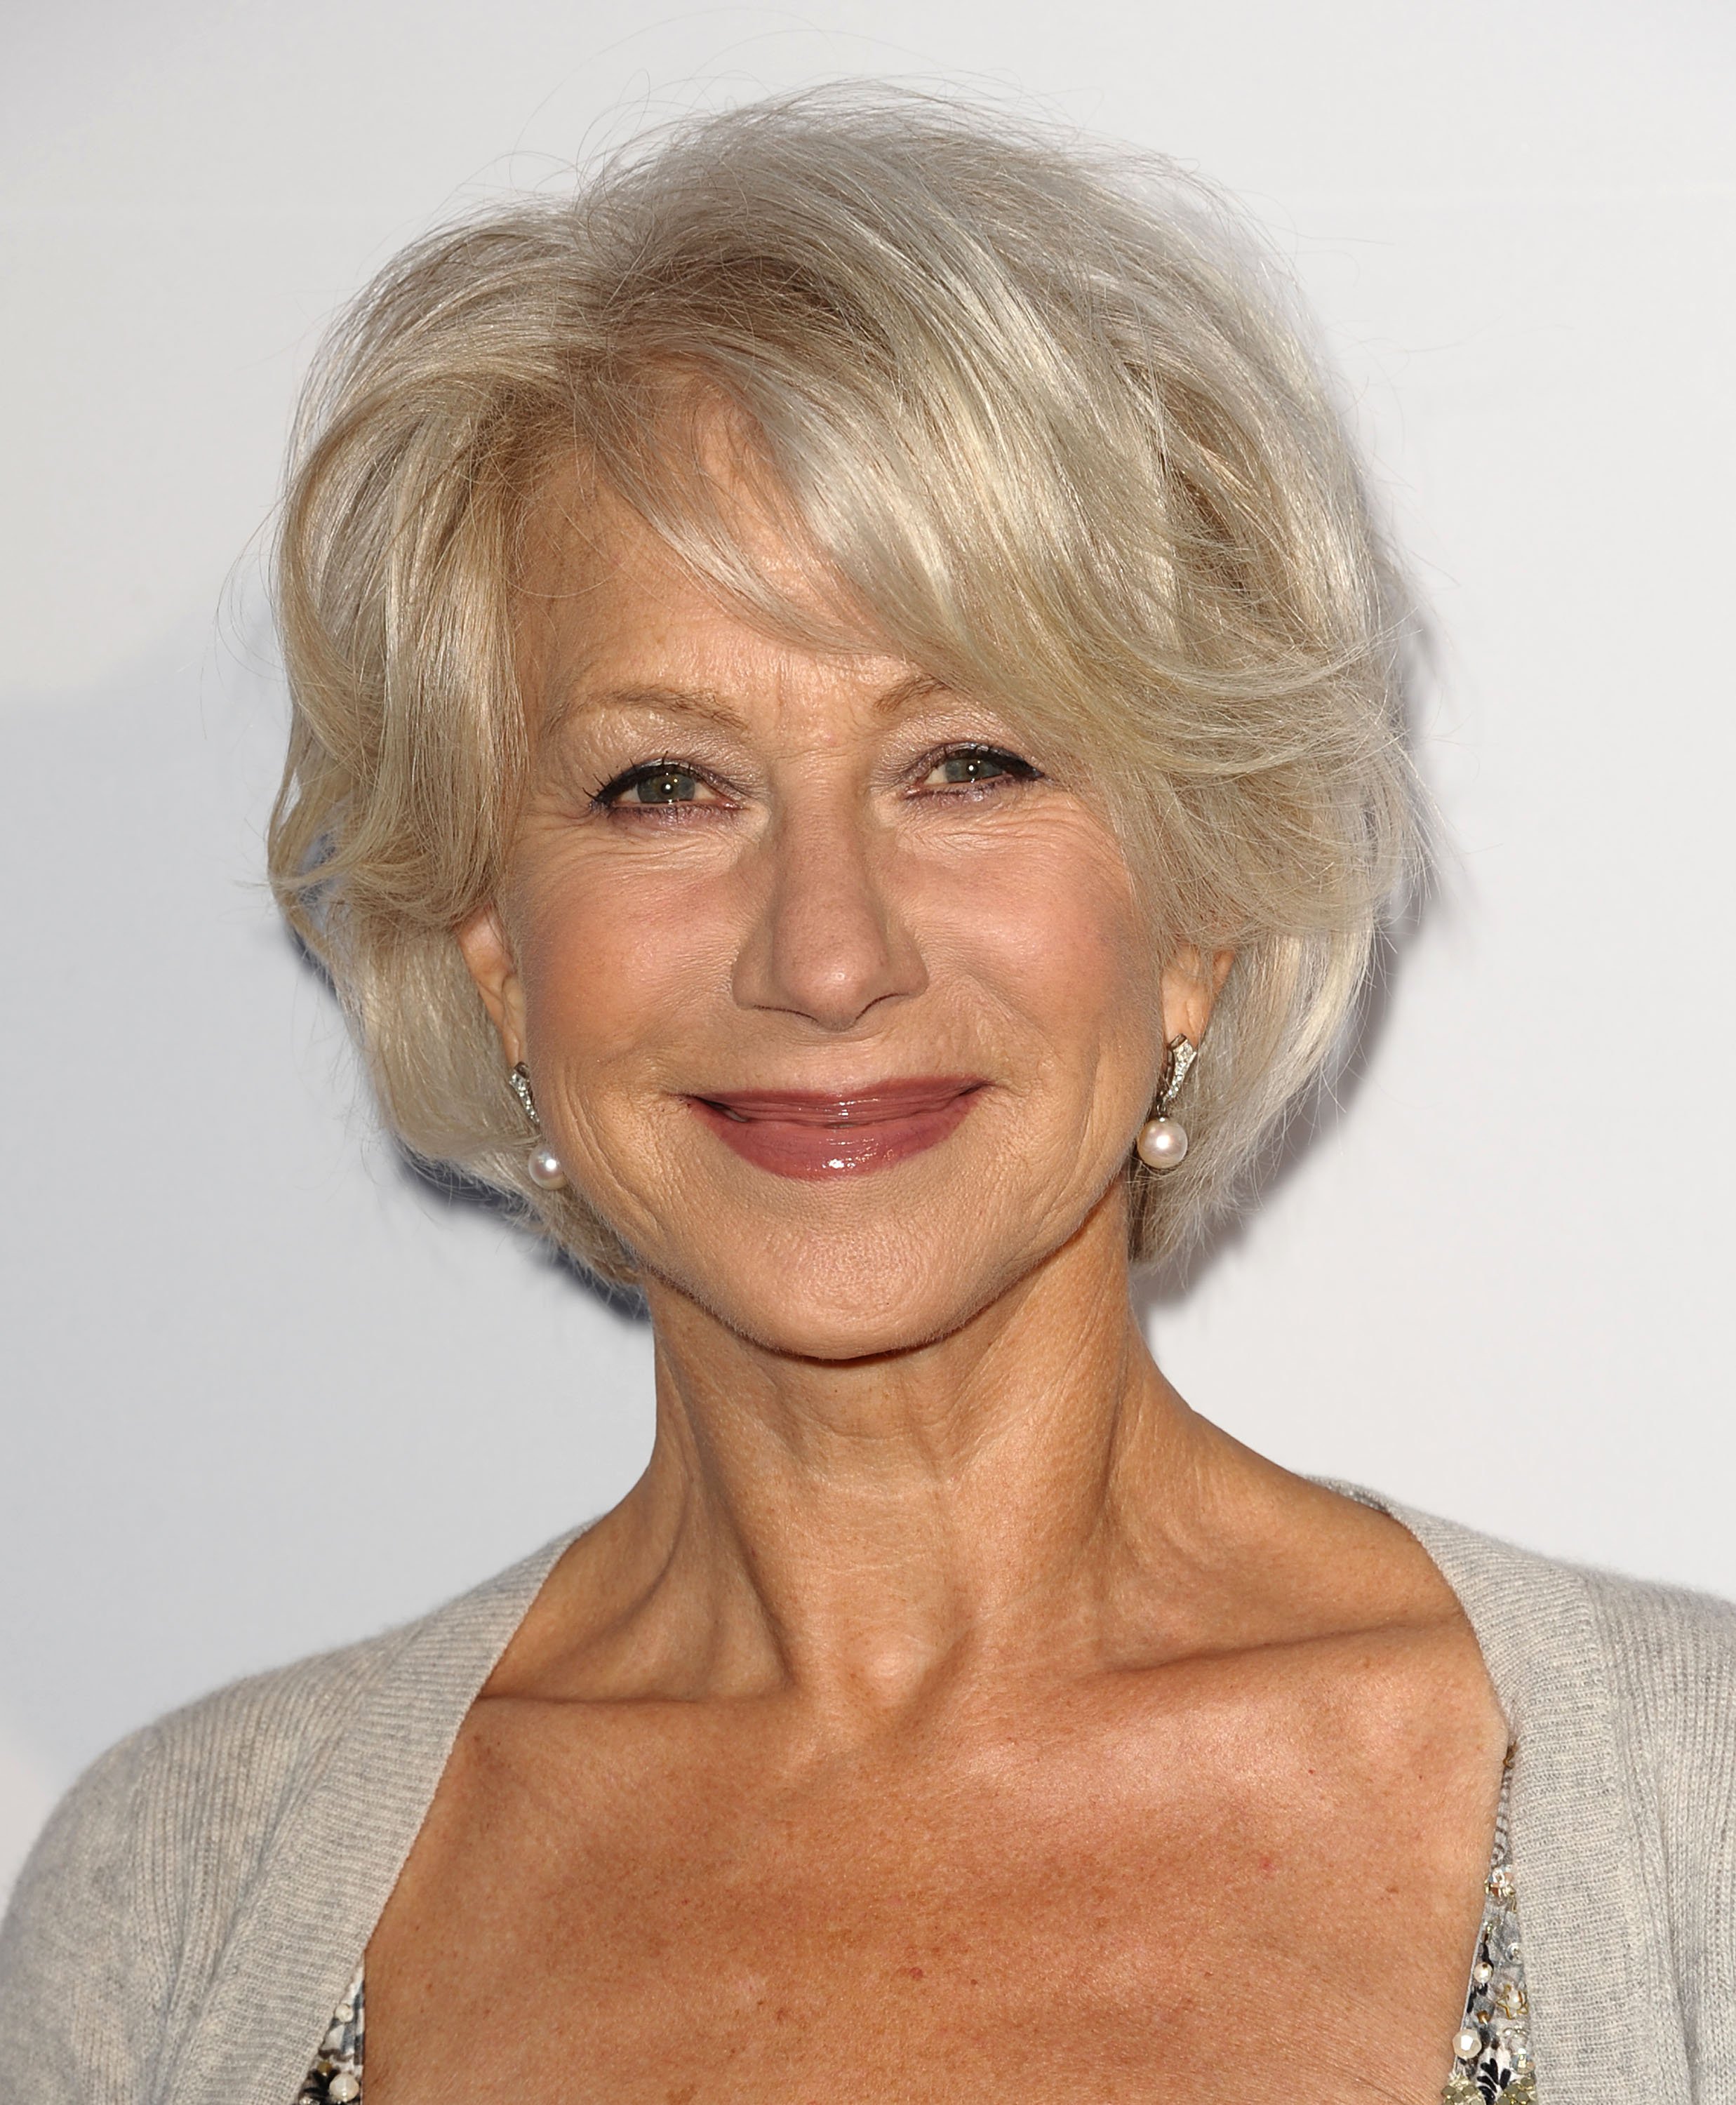 Dame Helen Mirren attends the Hollywood Bowl Hall of Fame ceremony at the Hollywood Bowl on June 17, 2011 | Source: Getty Images